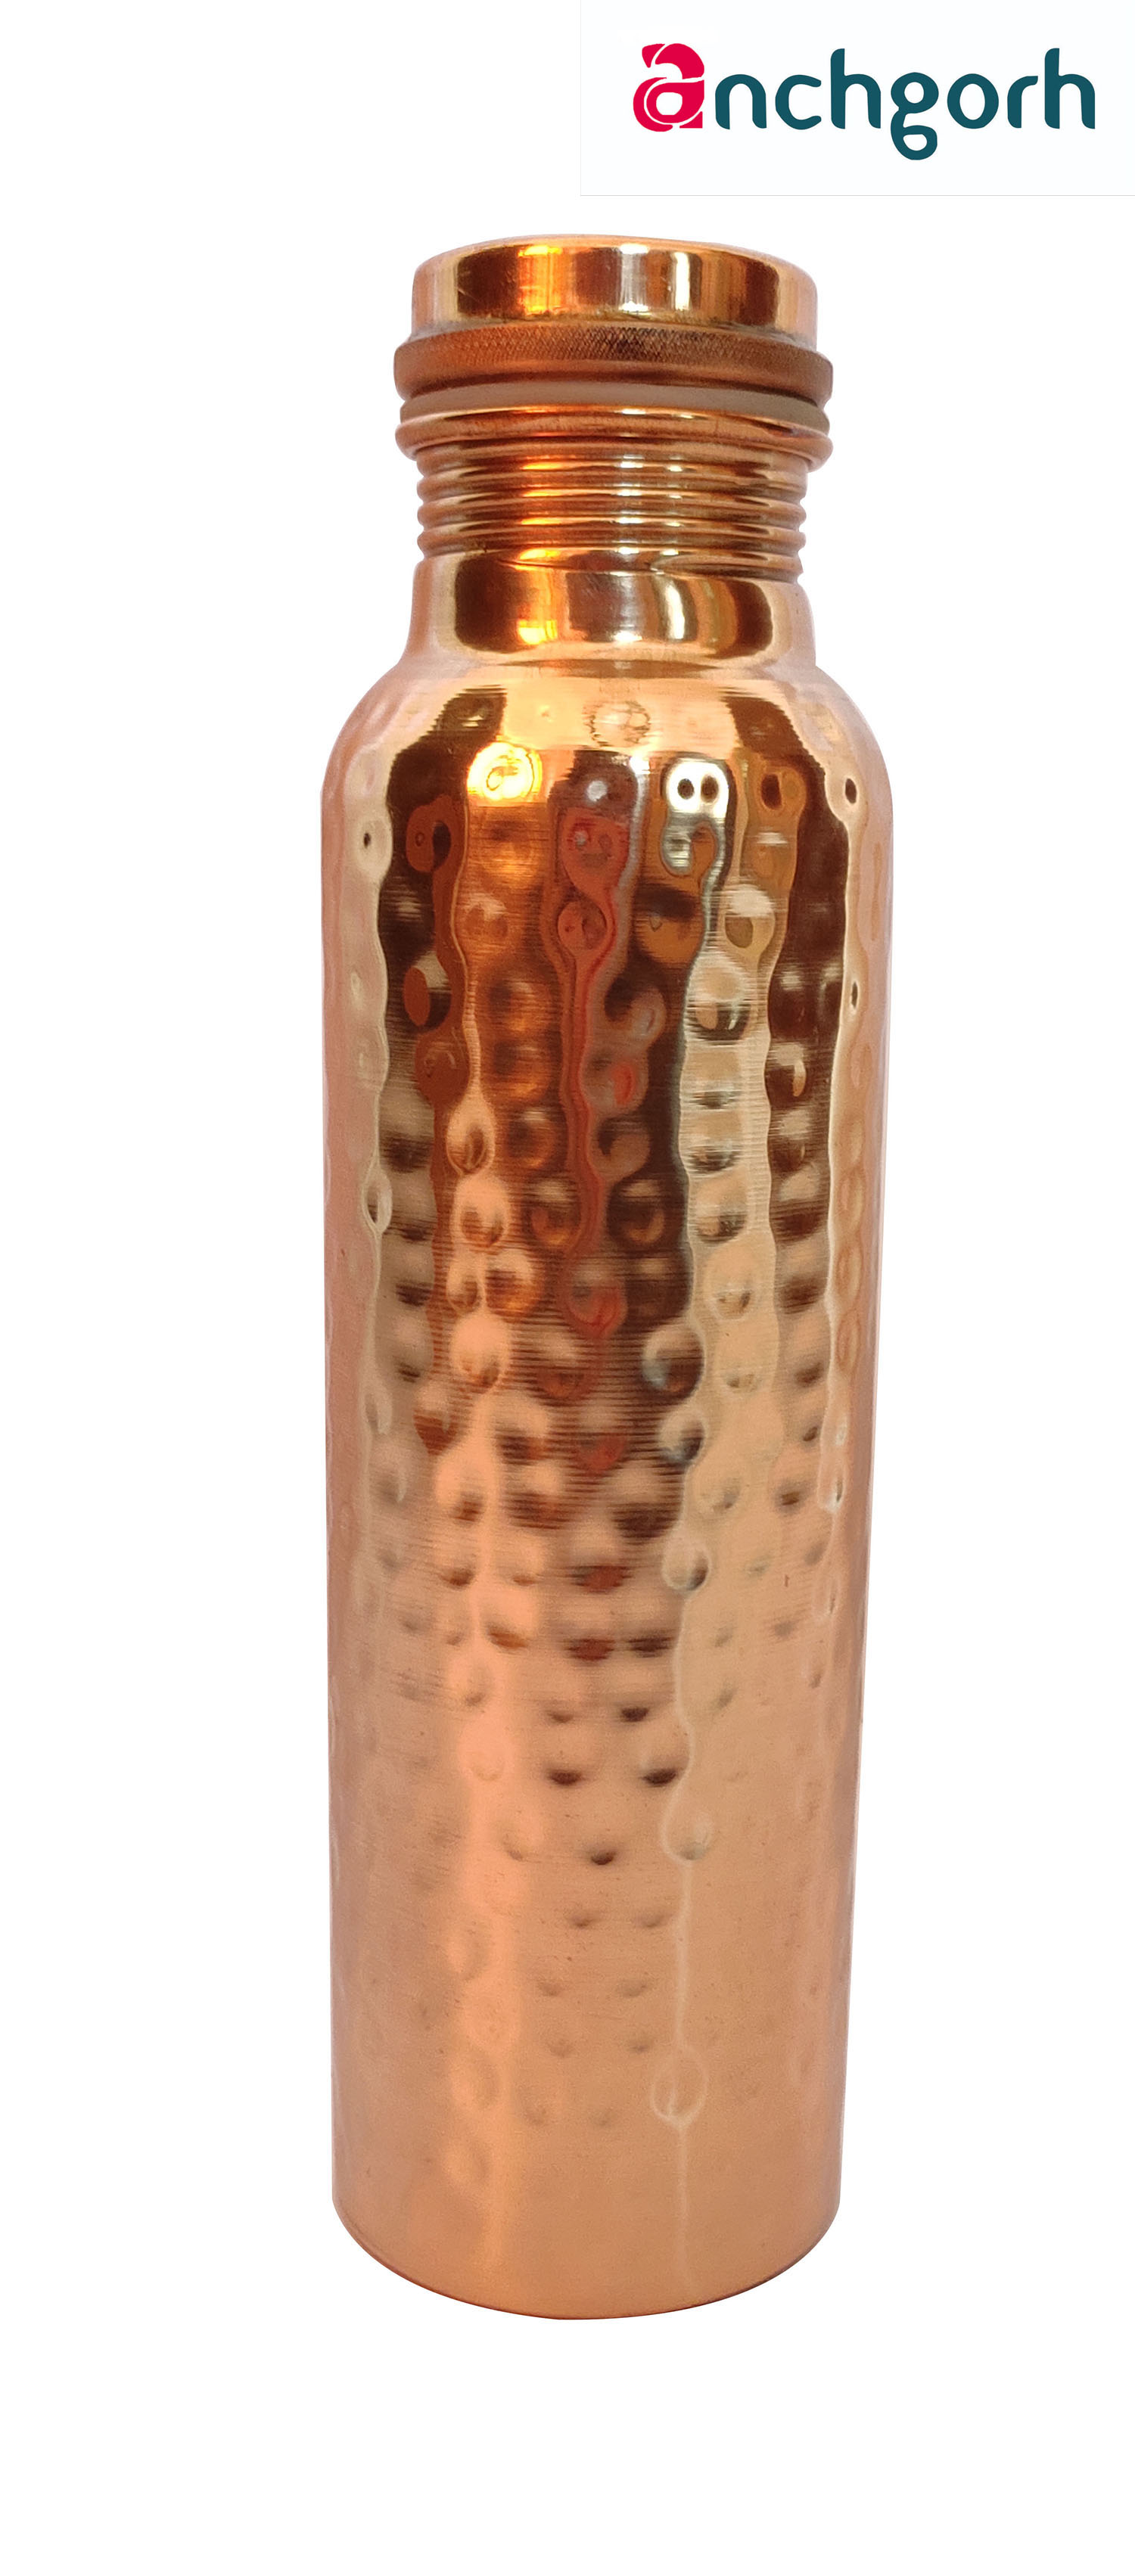 Anchgorh Hammered Copper Bottles for Water, Copper Water Bottle, Ayurvedic Copper Bottle, 950 ML, Set of 1 from Anchgorh